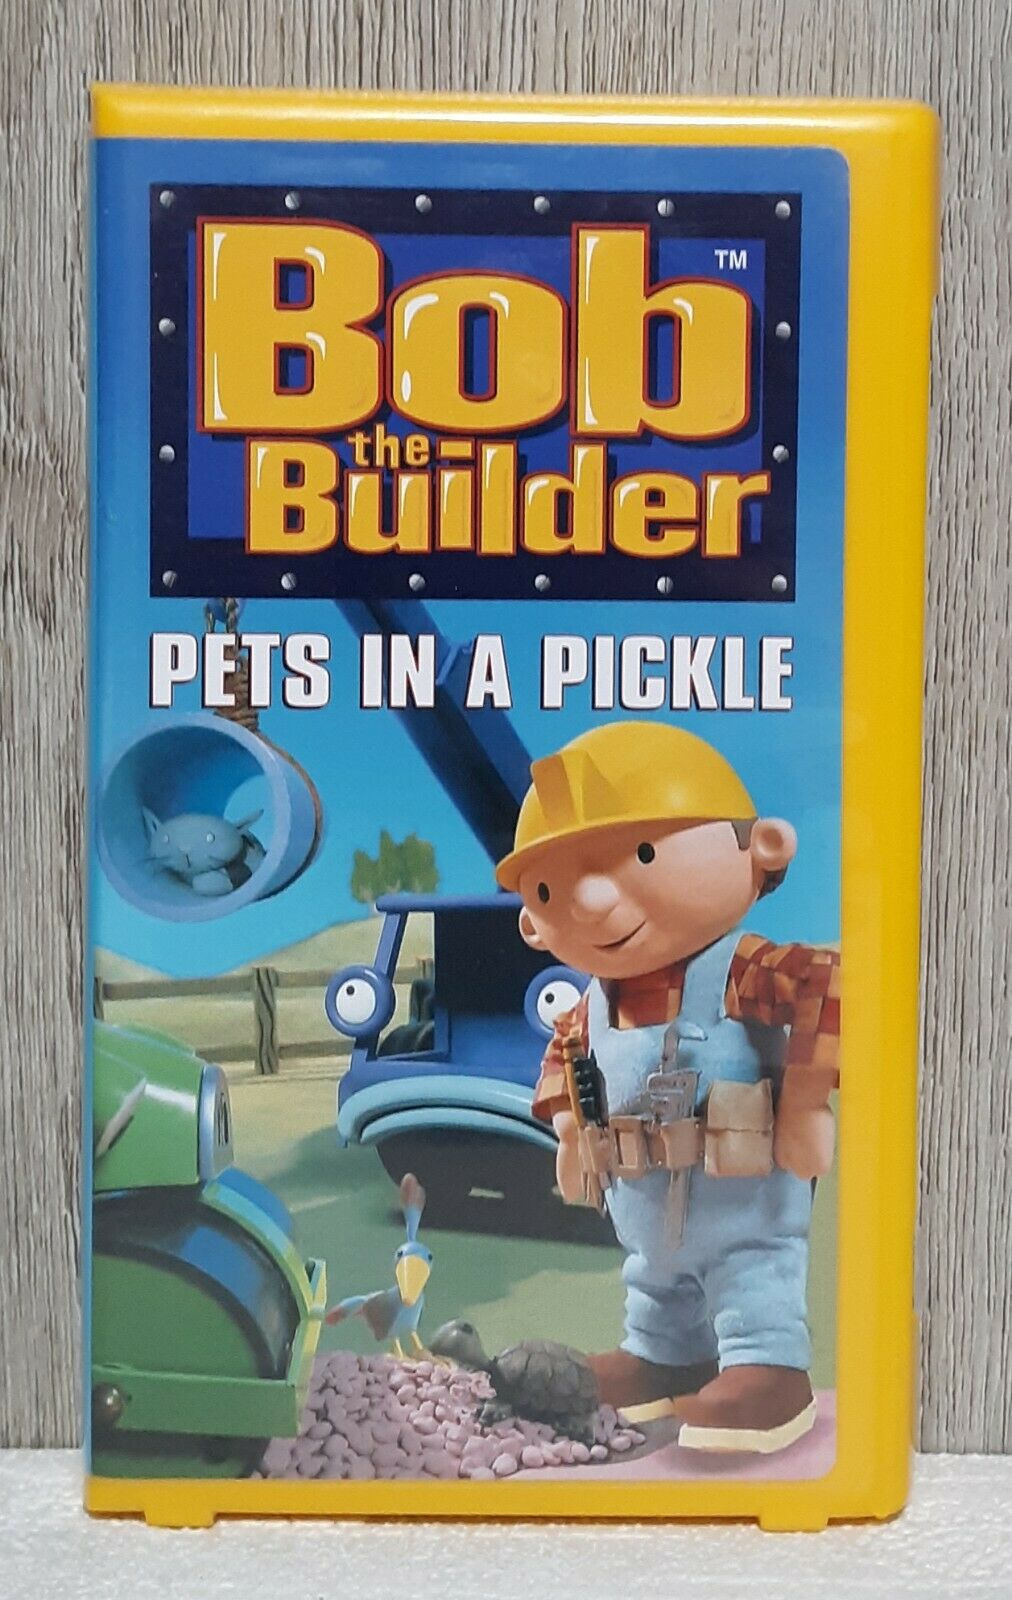 Bob the Builder: Pets in a Pickle (2001 VHS) | Angry Grandpa's Media